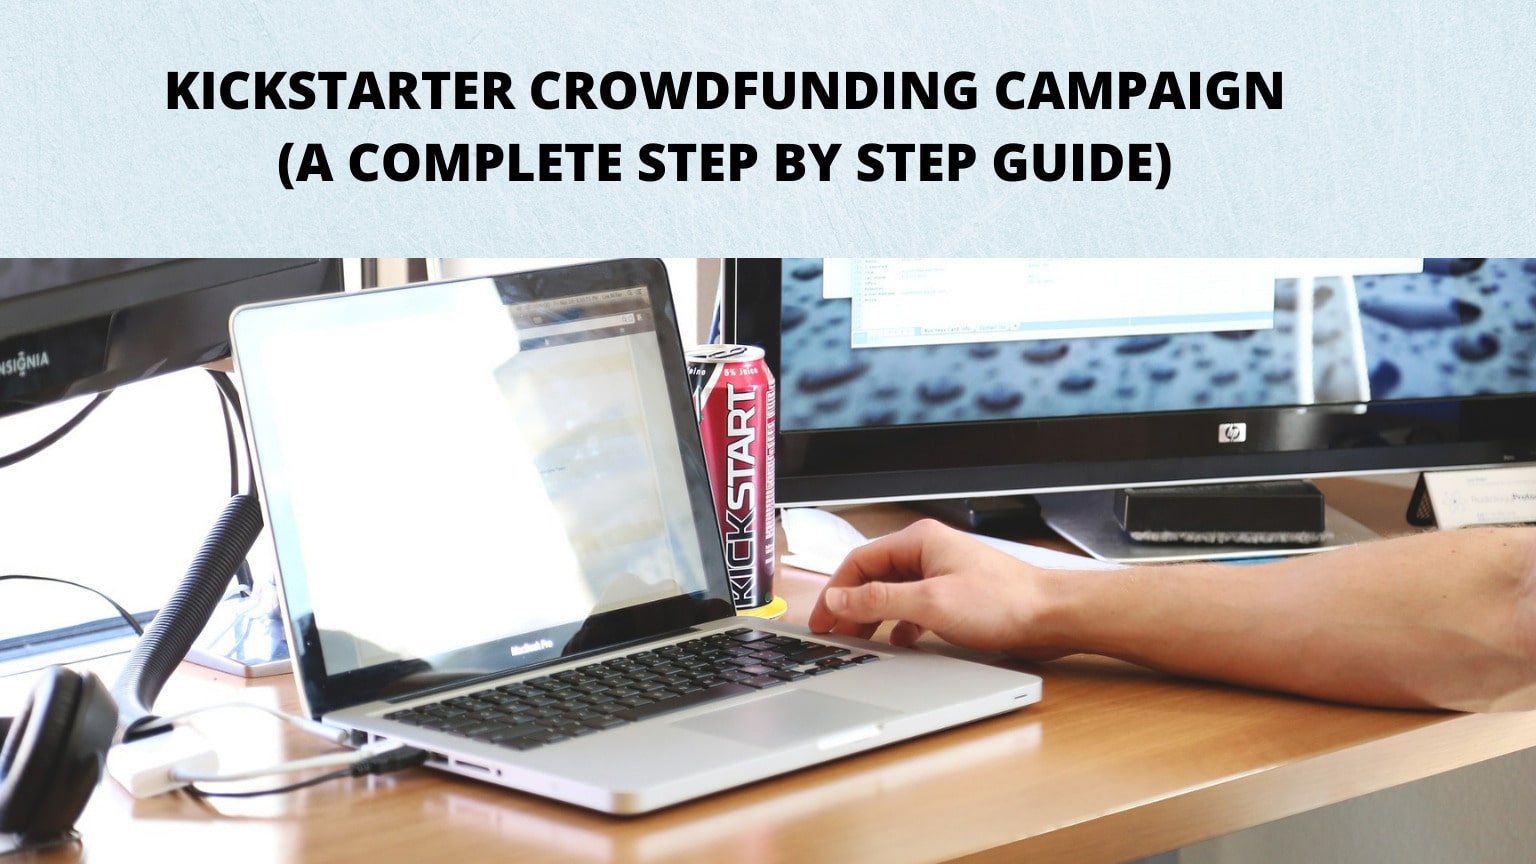 Kickstarter Crowdfunding Campaign – A Complete Step by Step Guide